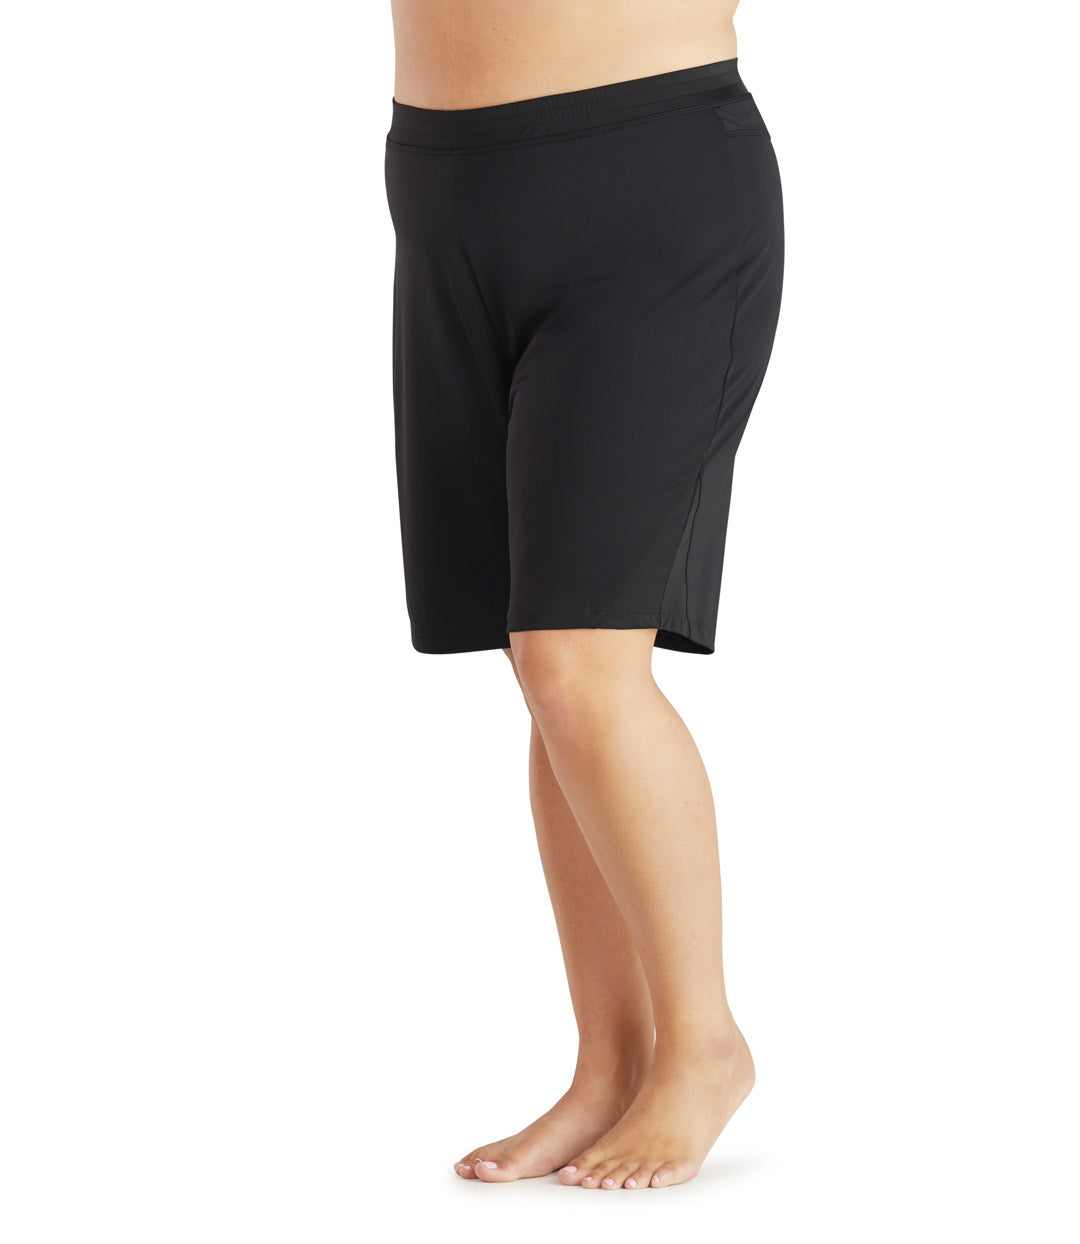 Bottom half of plus size woman facing front, wearing a black JunoActive plus size swim and beach short with brief. The hem is just above the knees.